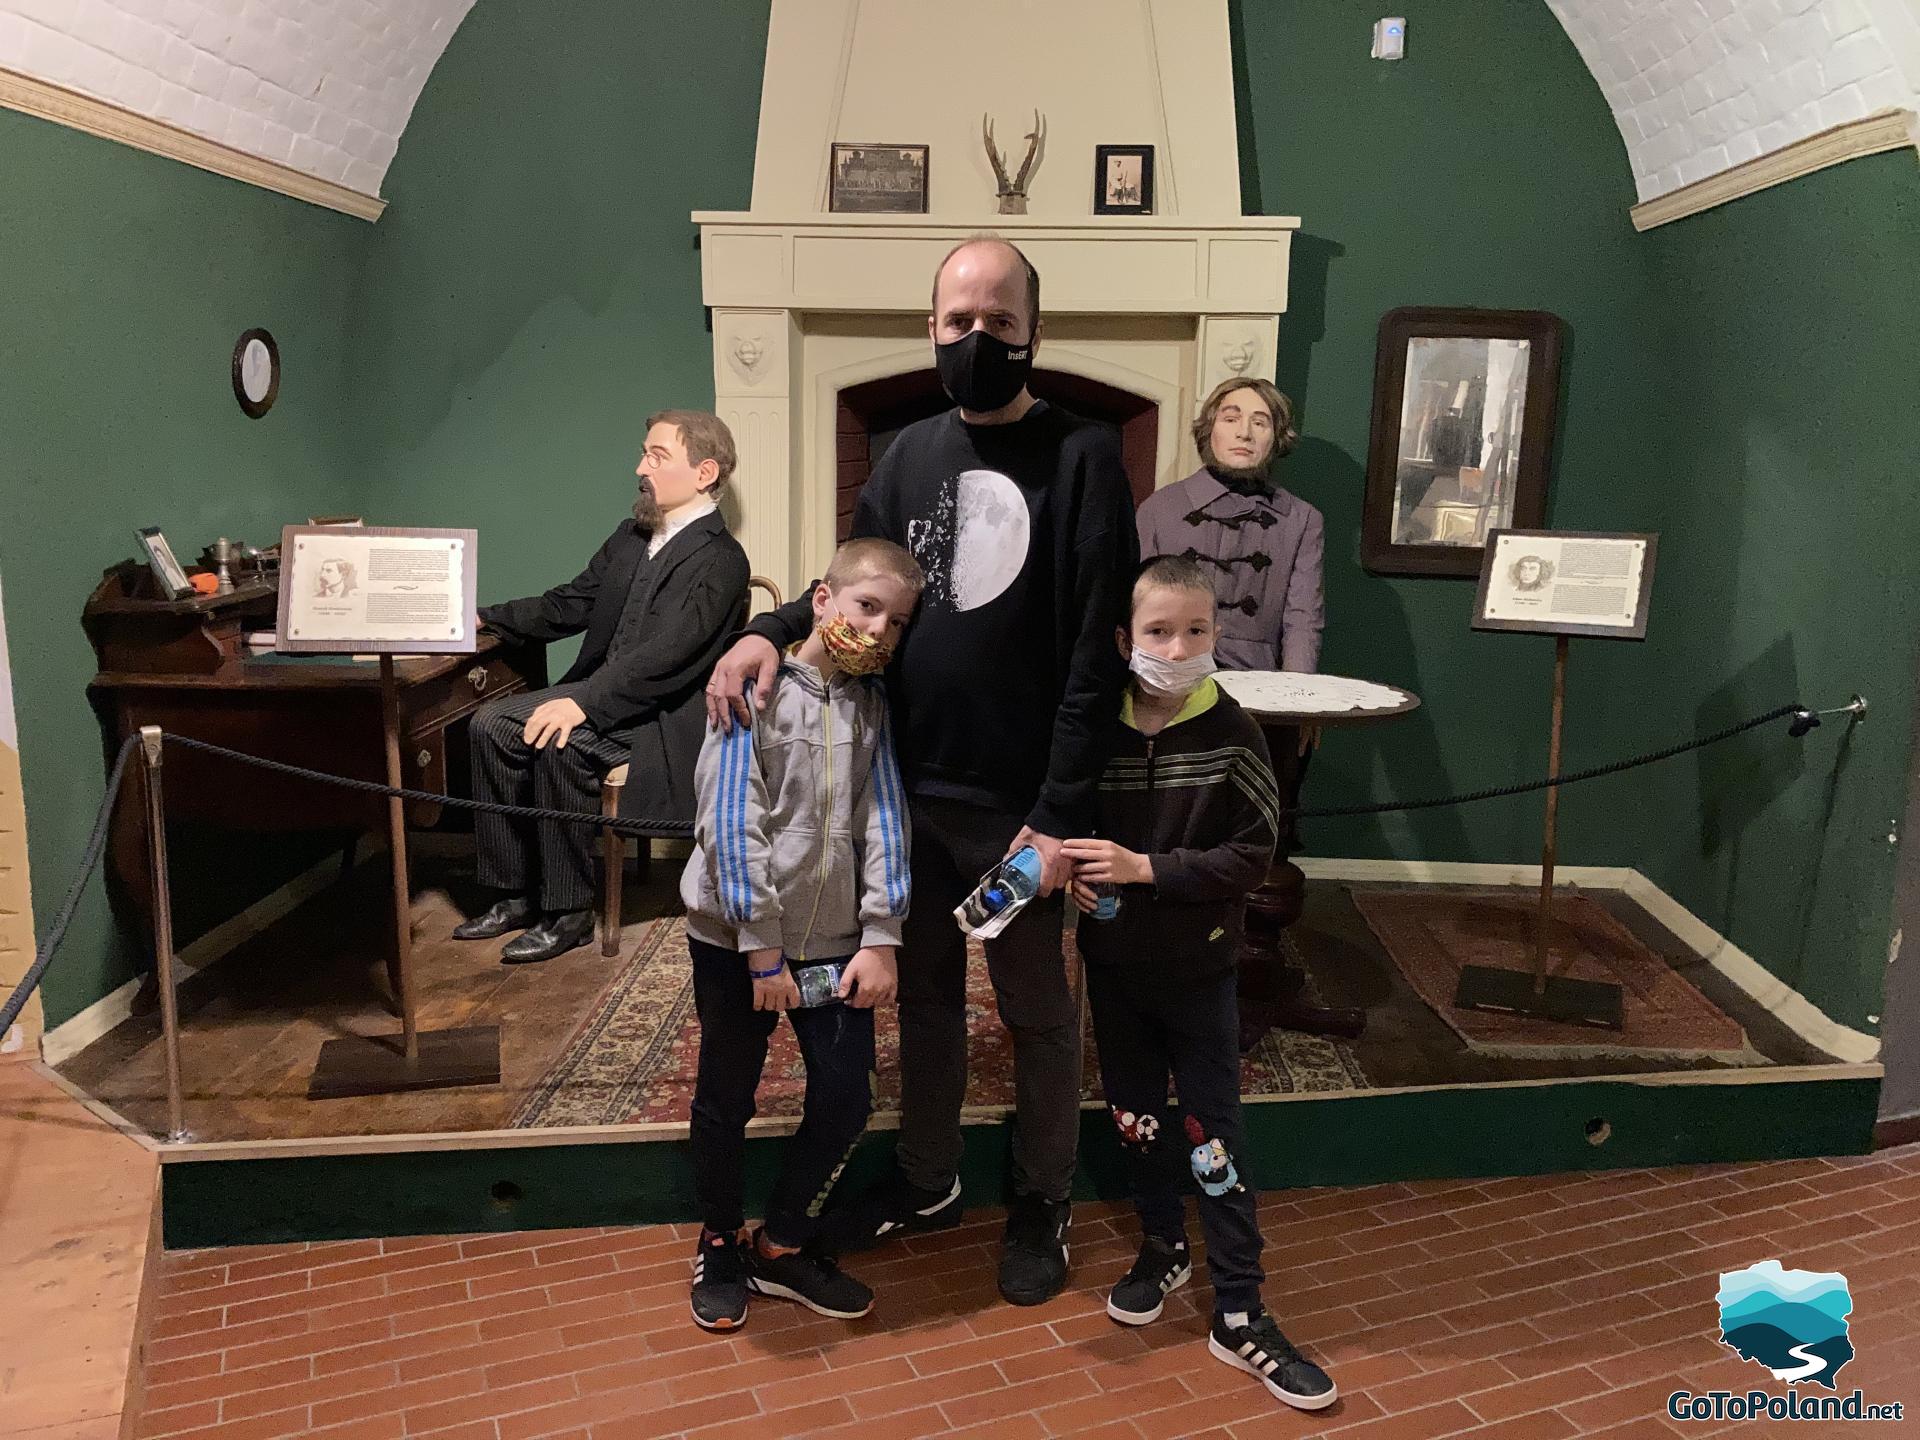 A man and two kids are standing in front of two wax figures of polish writers.